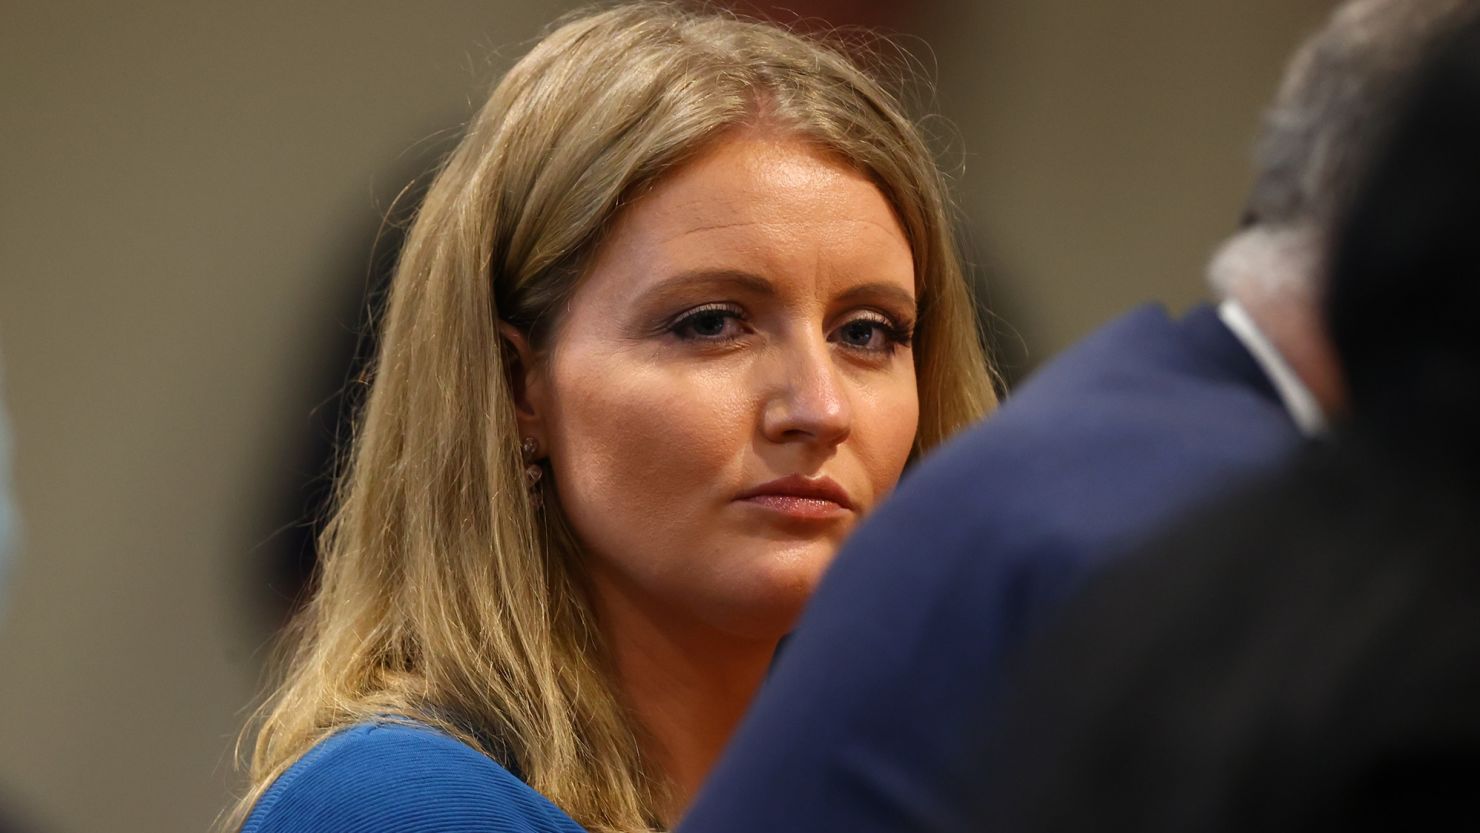 Jenna Ellis, a member of President Donald Trump's legal team, listens to Detroit poll worker Jessi Jacobs during an appearance before the Michigan House Oversight Committee on December 2, 2020 in Lansing, Michigan.